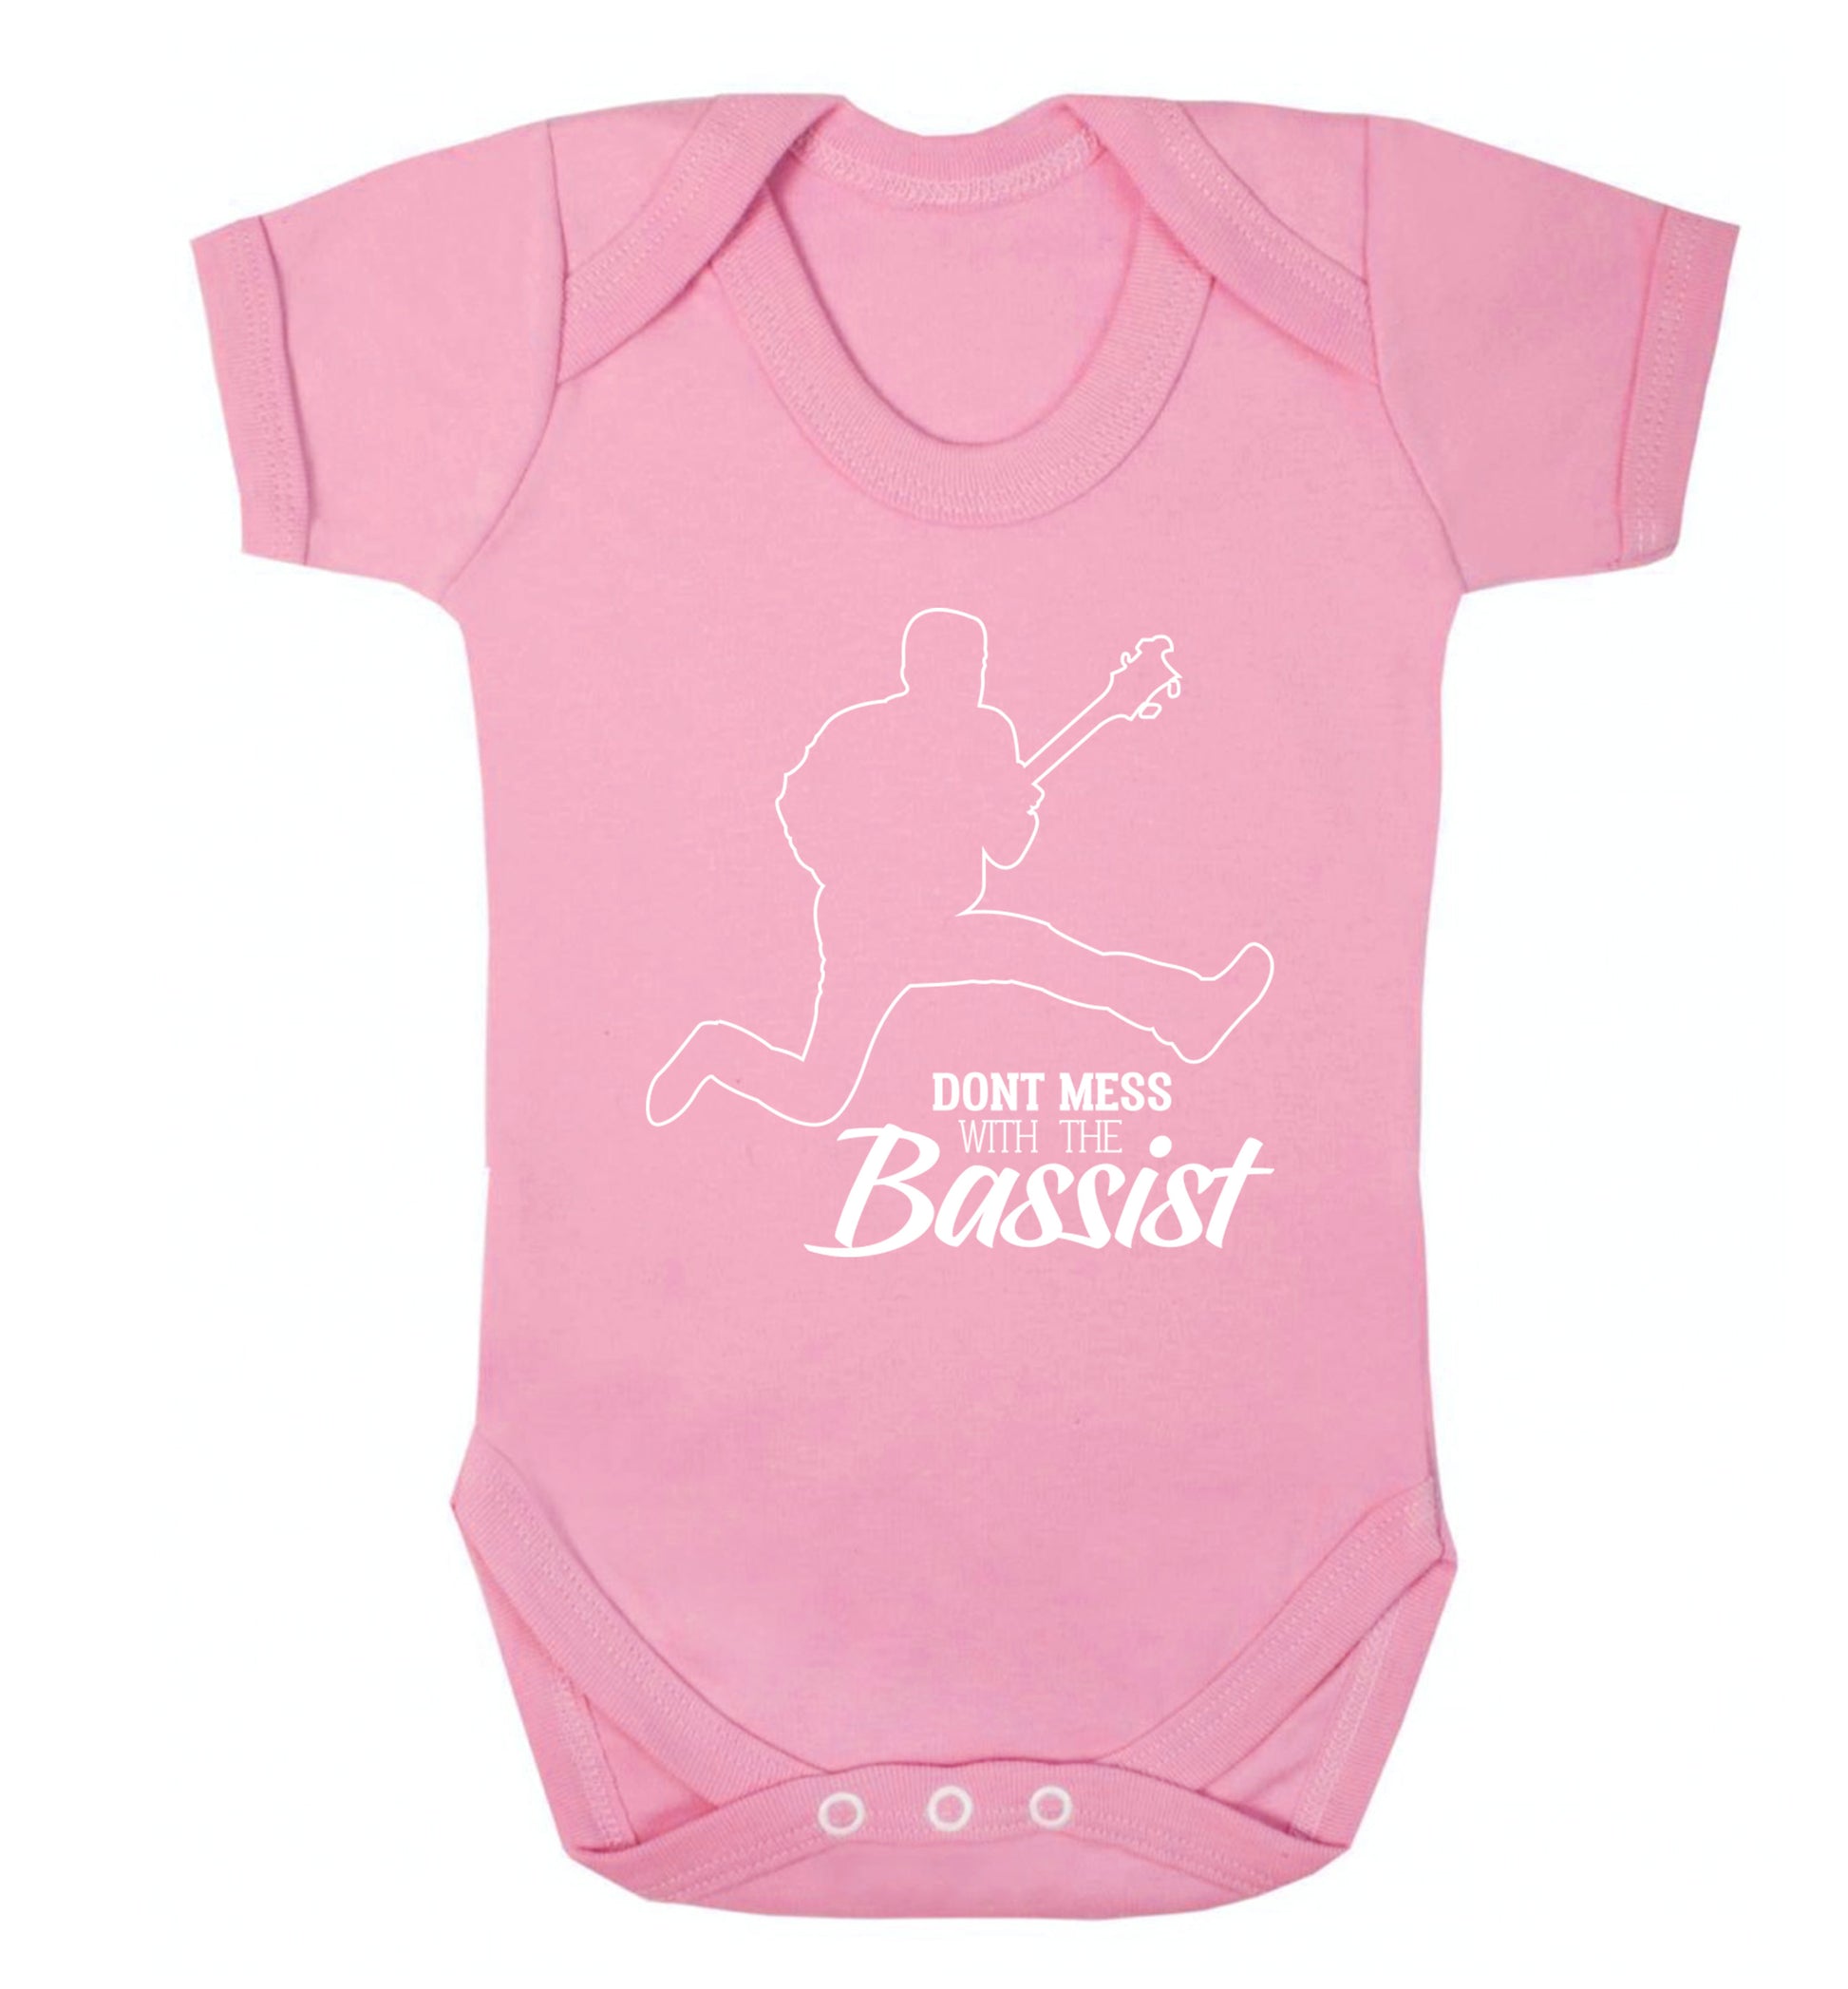 Dont mess with the bassist Baby Vest pale pink 18-24 months